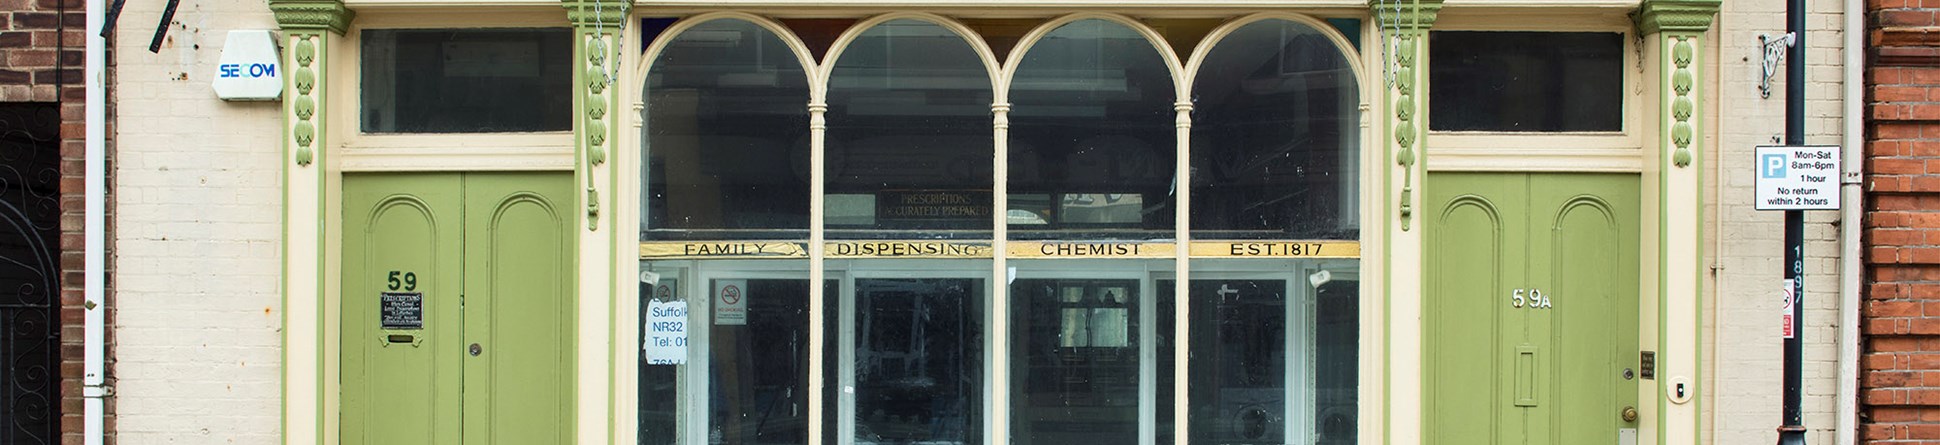 Front of former Chemist Shop, showing empty windows